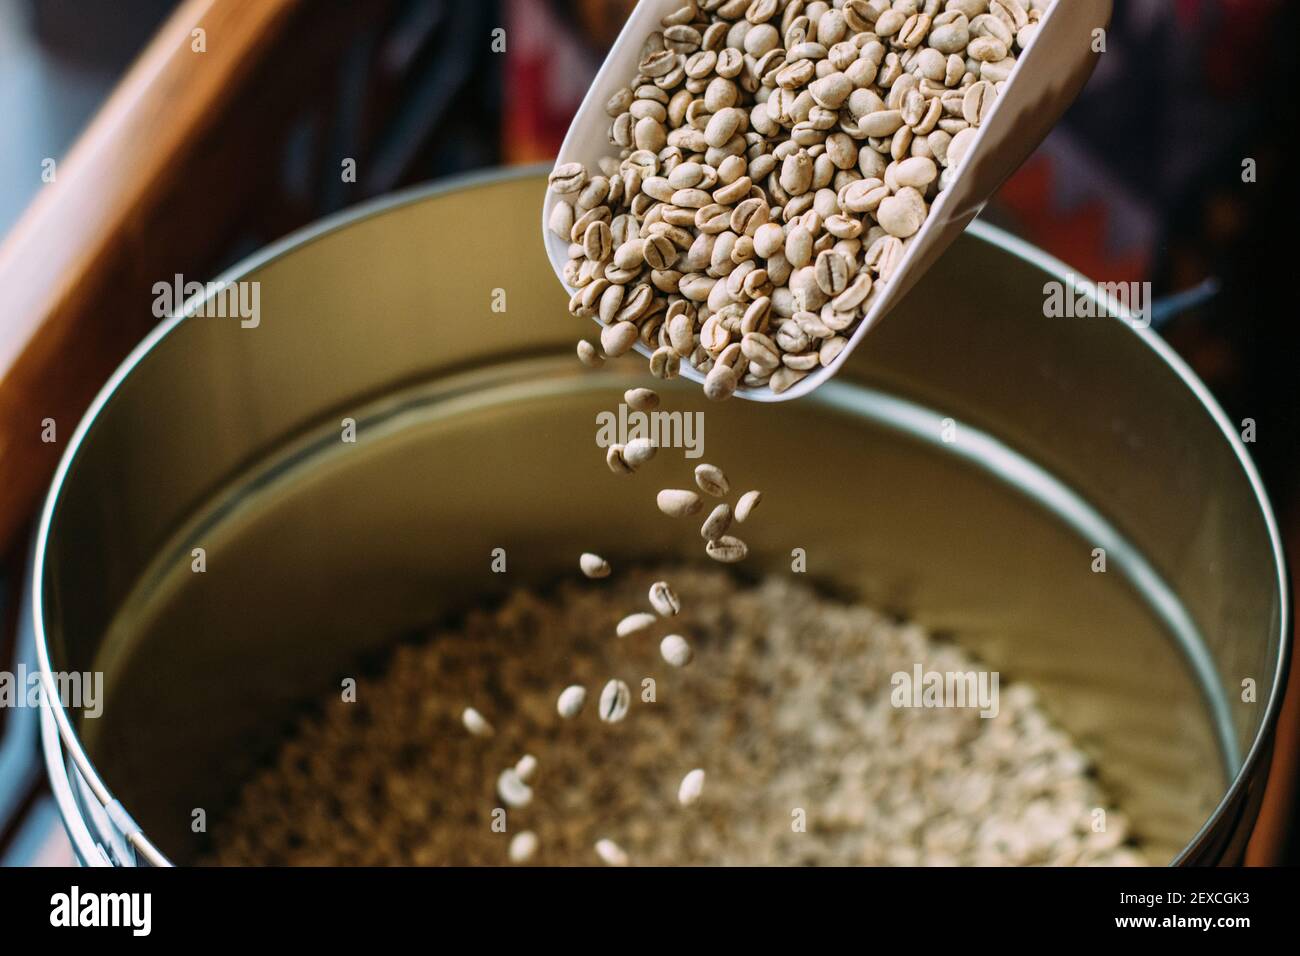 Raw coffee bean, pouring into a metal barrel Stock Photo